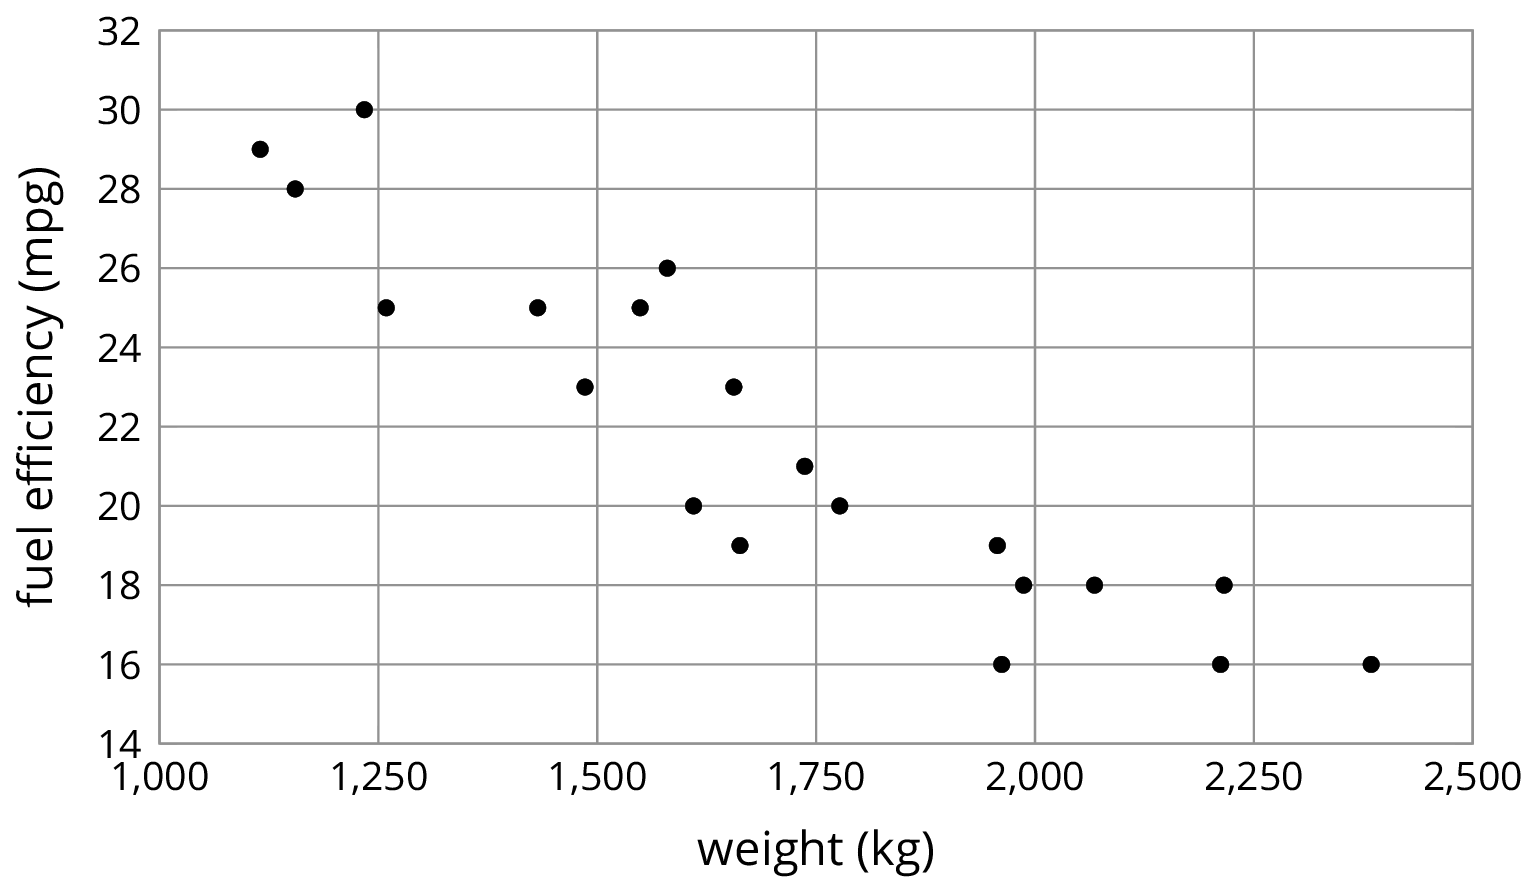 A scatterplot with 20 data points. The horizontal axis is labeled “weight, in kilograms” and the numbers 1,000 through 2,500, in increments of 250, are indicated. The vertical axis is labeled “fuel efficiency, in miles per gallon” and the numbers 14 through 32, in increments of 2, are indicated. The graph shows the trend of the 20 data points moving linearly downward and to the right. The approximate coordinates of 11 selected data points are as follows:  1,130 comma 28. 1,240 comma 30. 1,400 comma 25. 1,490 comma 23. 1,550 comma 25. 1,590 comma 26. 1,650 comma 19. 1,740 comma 21. 1,775 comma 20. 1,950 comma 19. 2,200 comma 16.